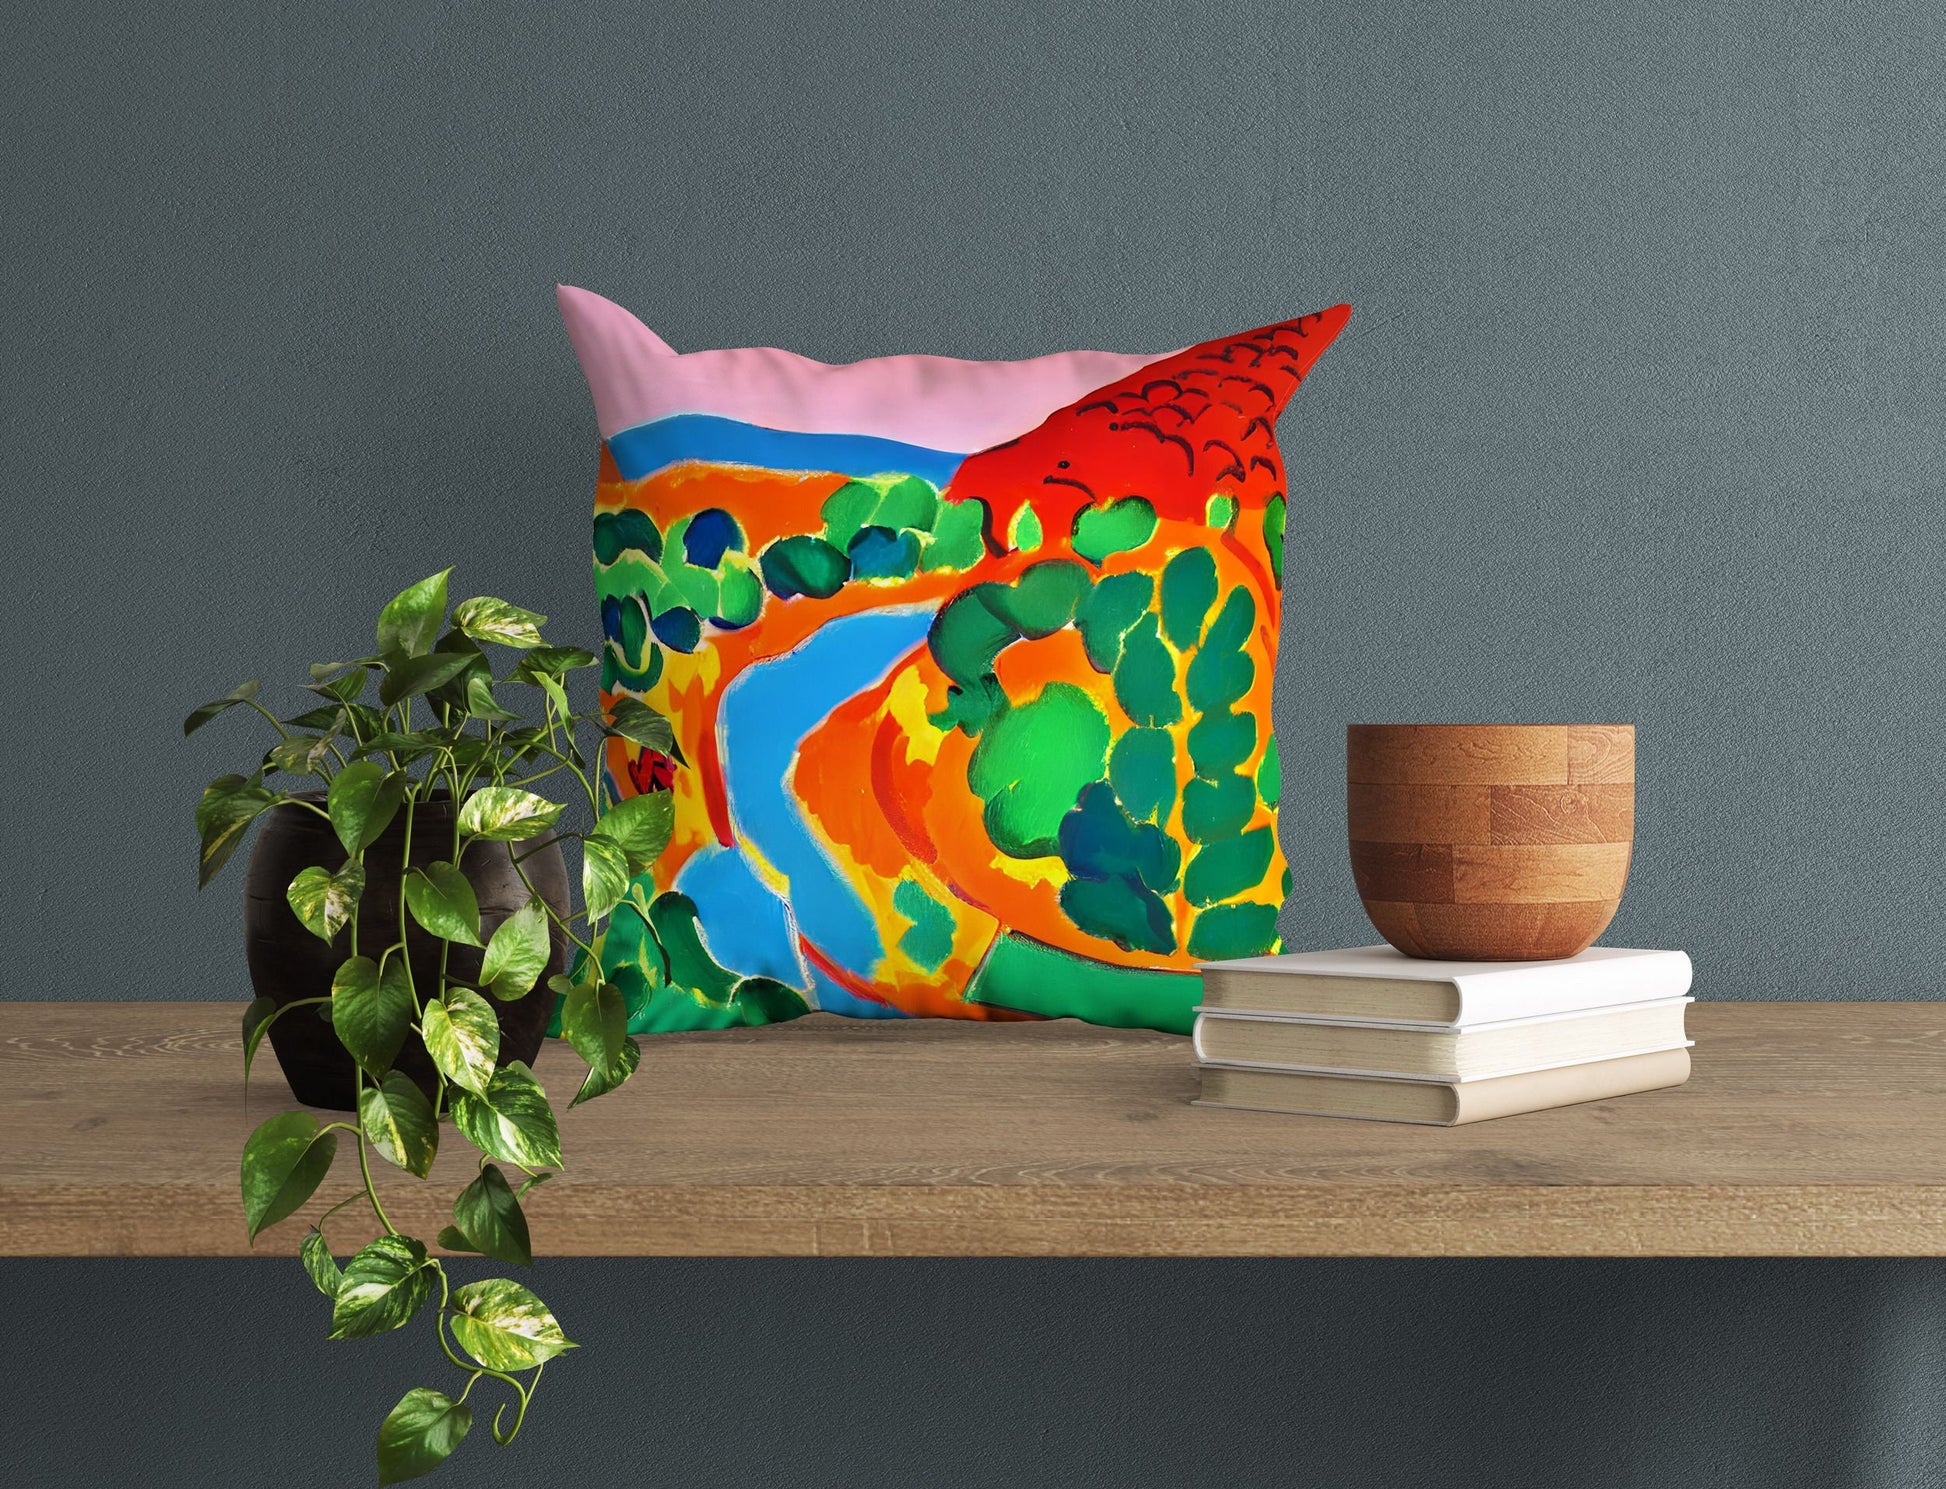 Abstract Landscape Toss Pillow, Abstract Pillow Case, Art Pillow, Colorful Pillow Case, Watercolor Pillow Cases, Square Pillow, Home Decor